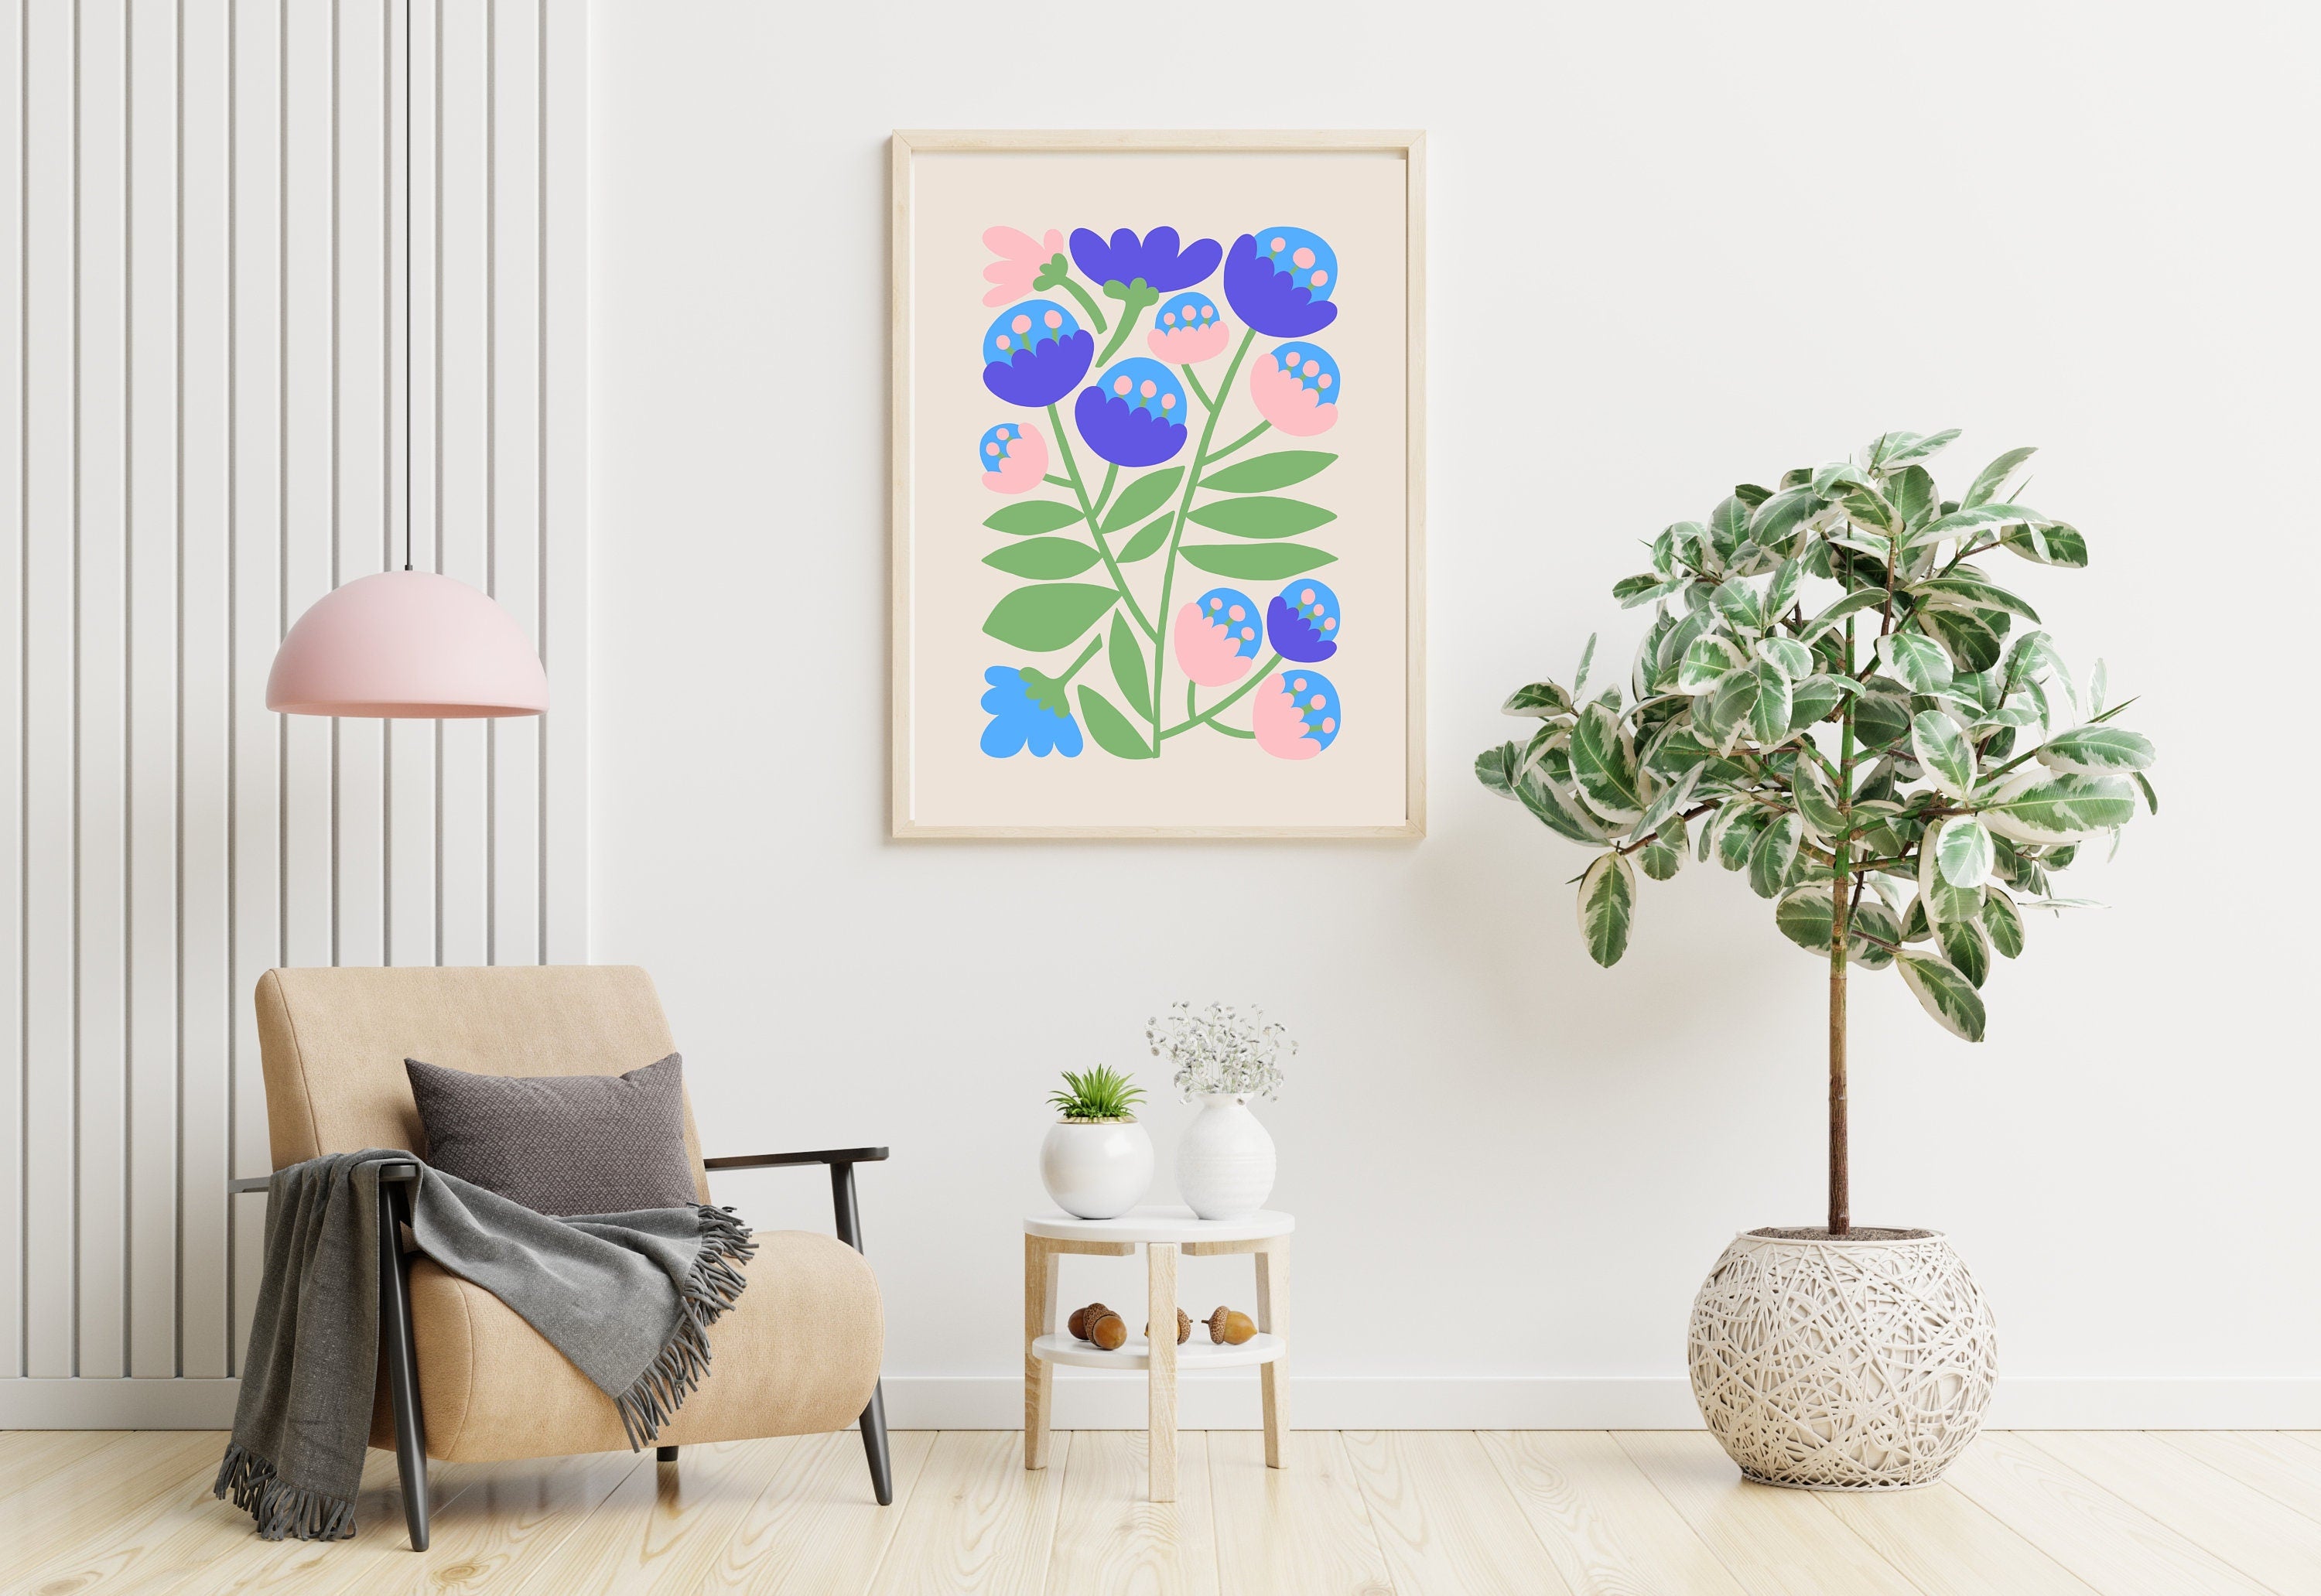 Instantly add a splash of color and joy to your home with this vibrant Bouquet of Flowers Digital Art Print from GS Print Shoppe. 